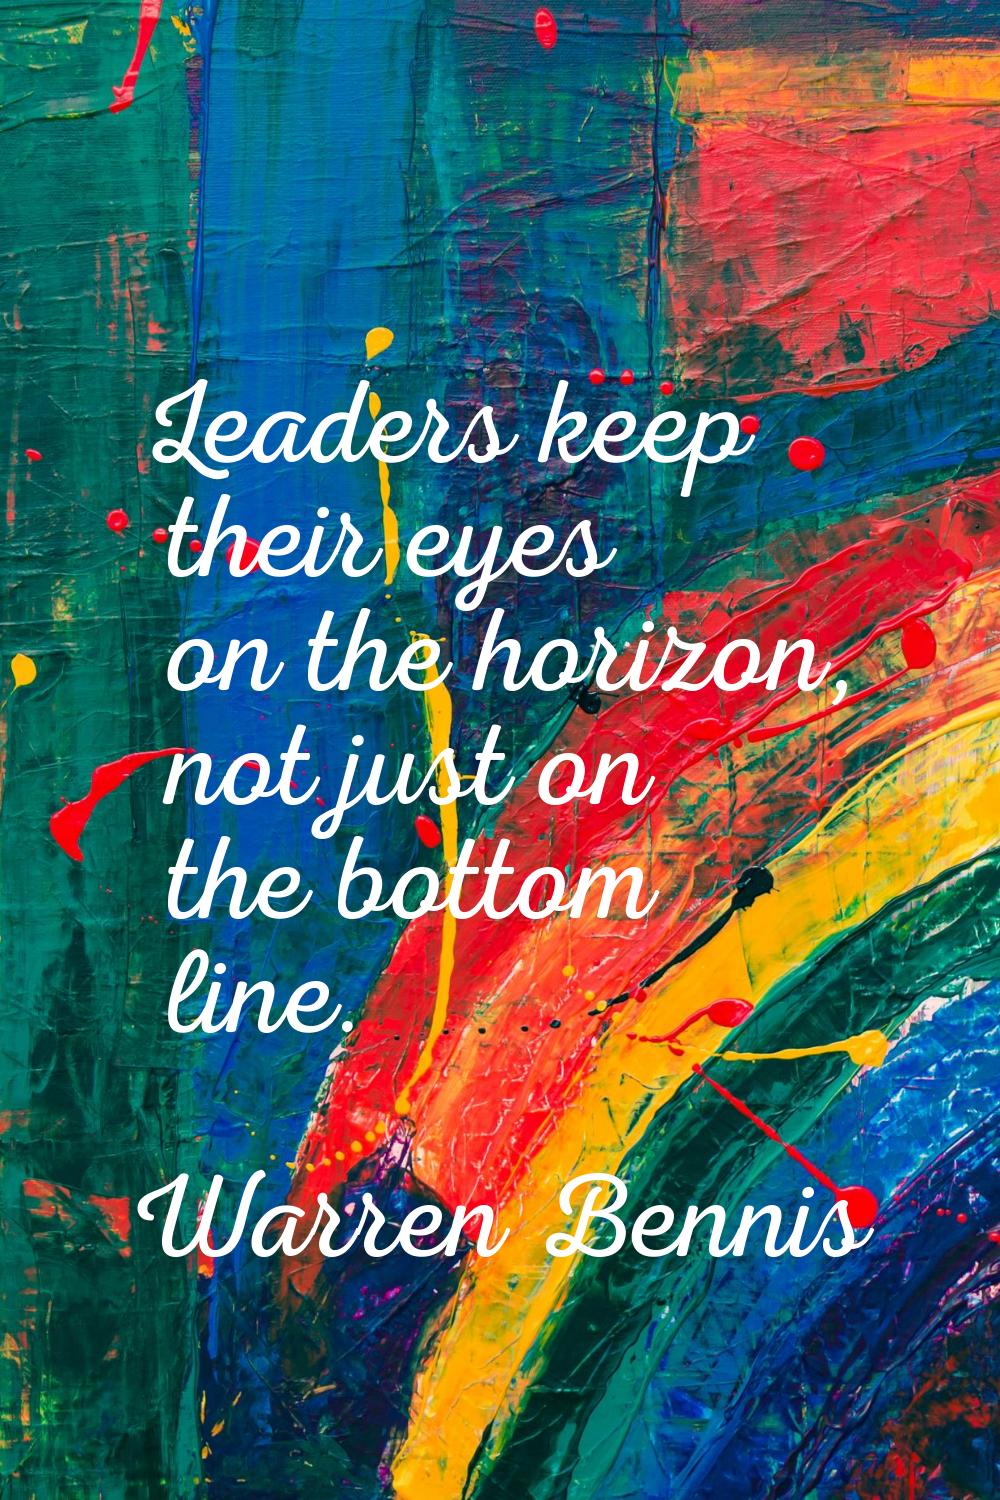 Leaders keep their eyes on the horizon, not just on the bottom line.